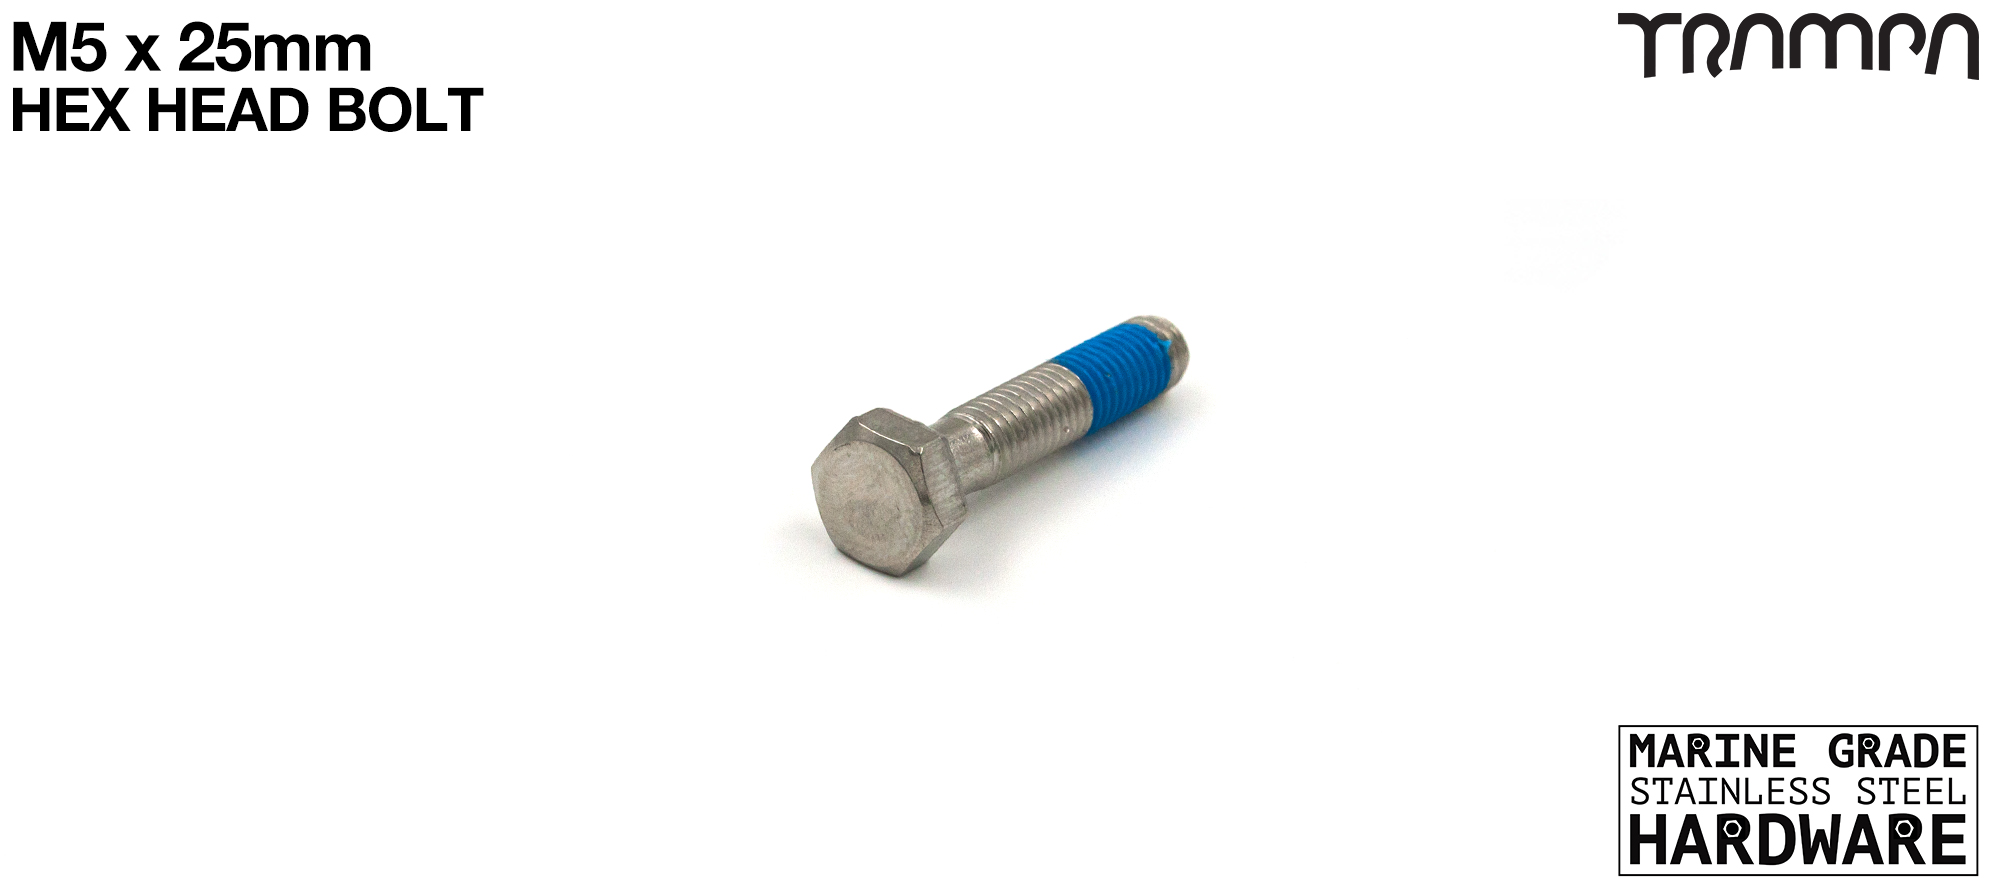 M5 x 25mm HEX Head SHANKED Bolt - Marine Grade Stainless steel with locking paste